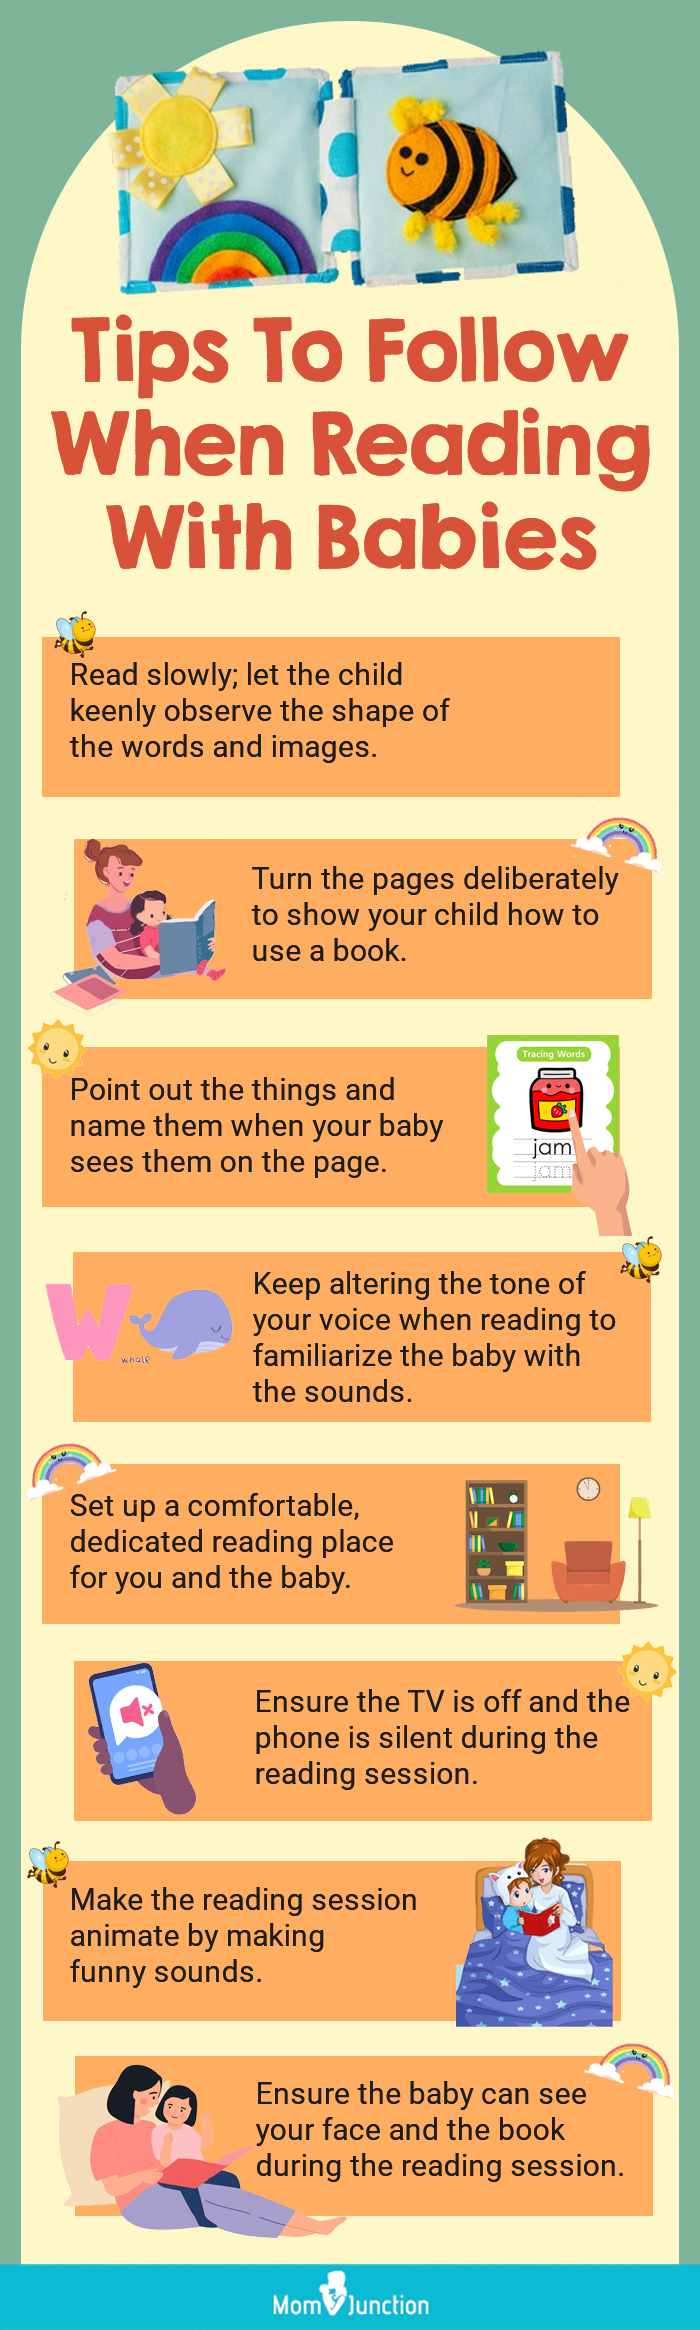 Tips To Follow When Reading With Babies